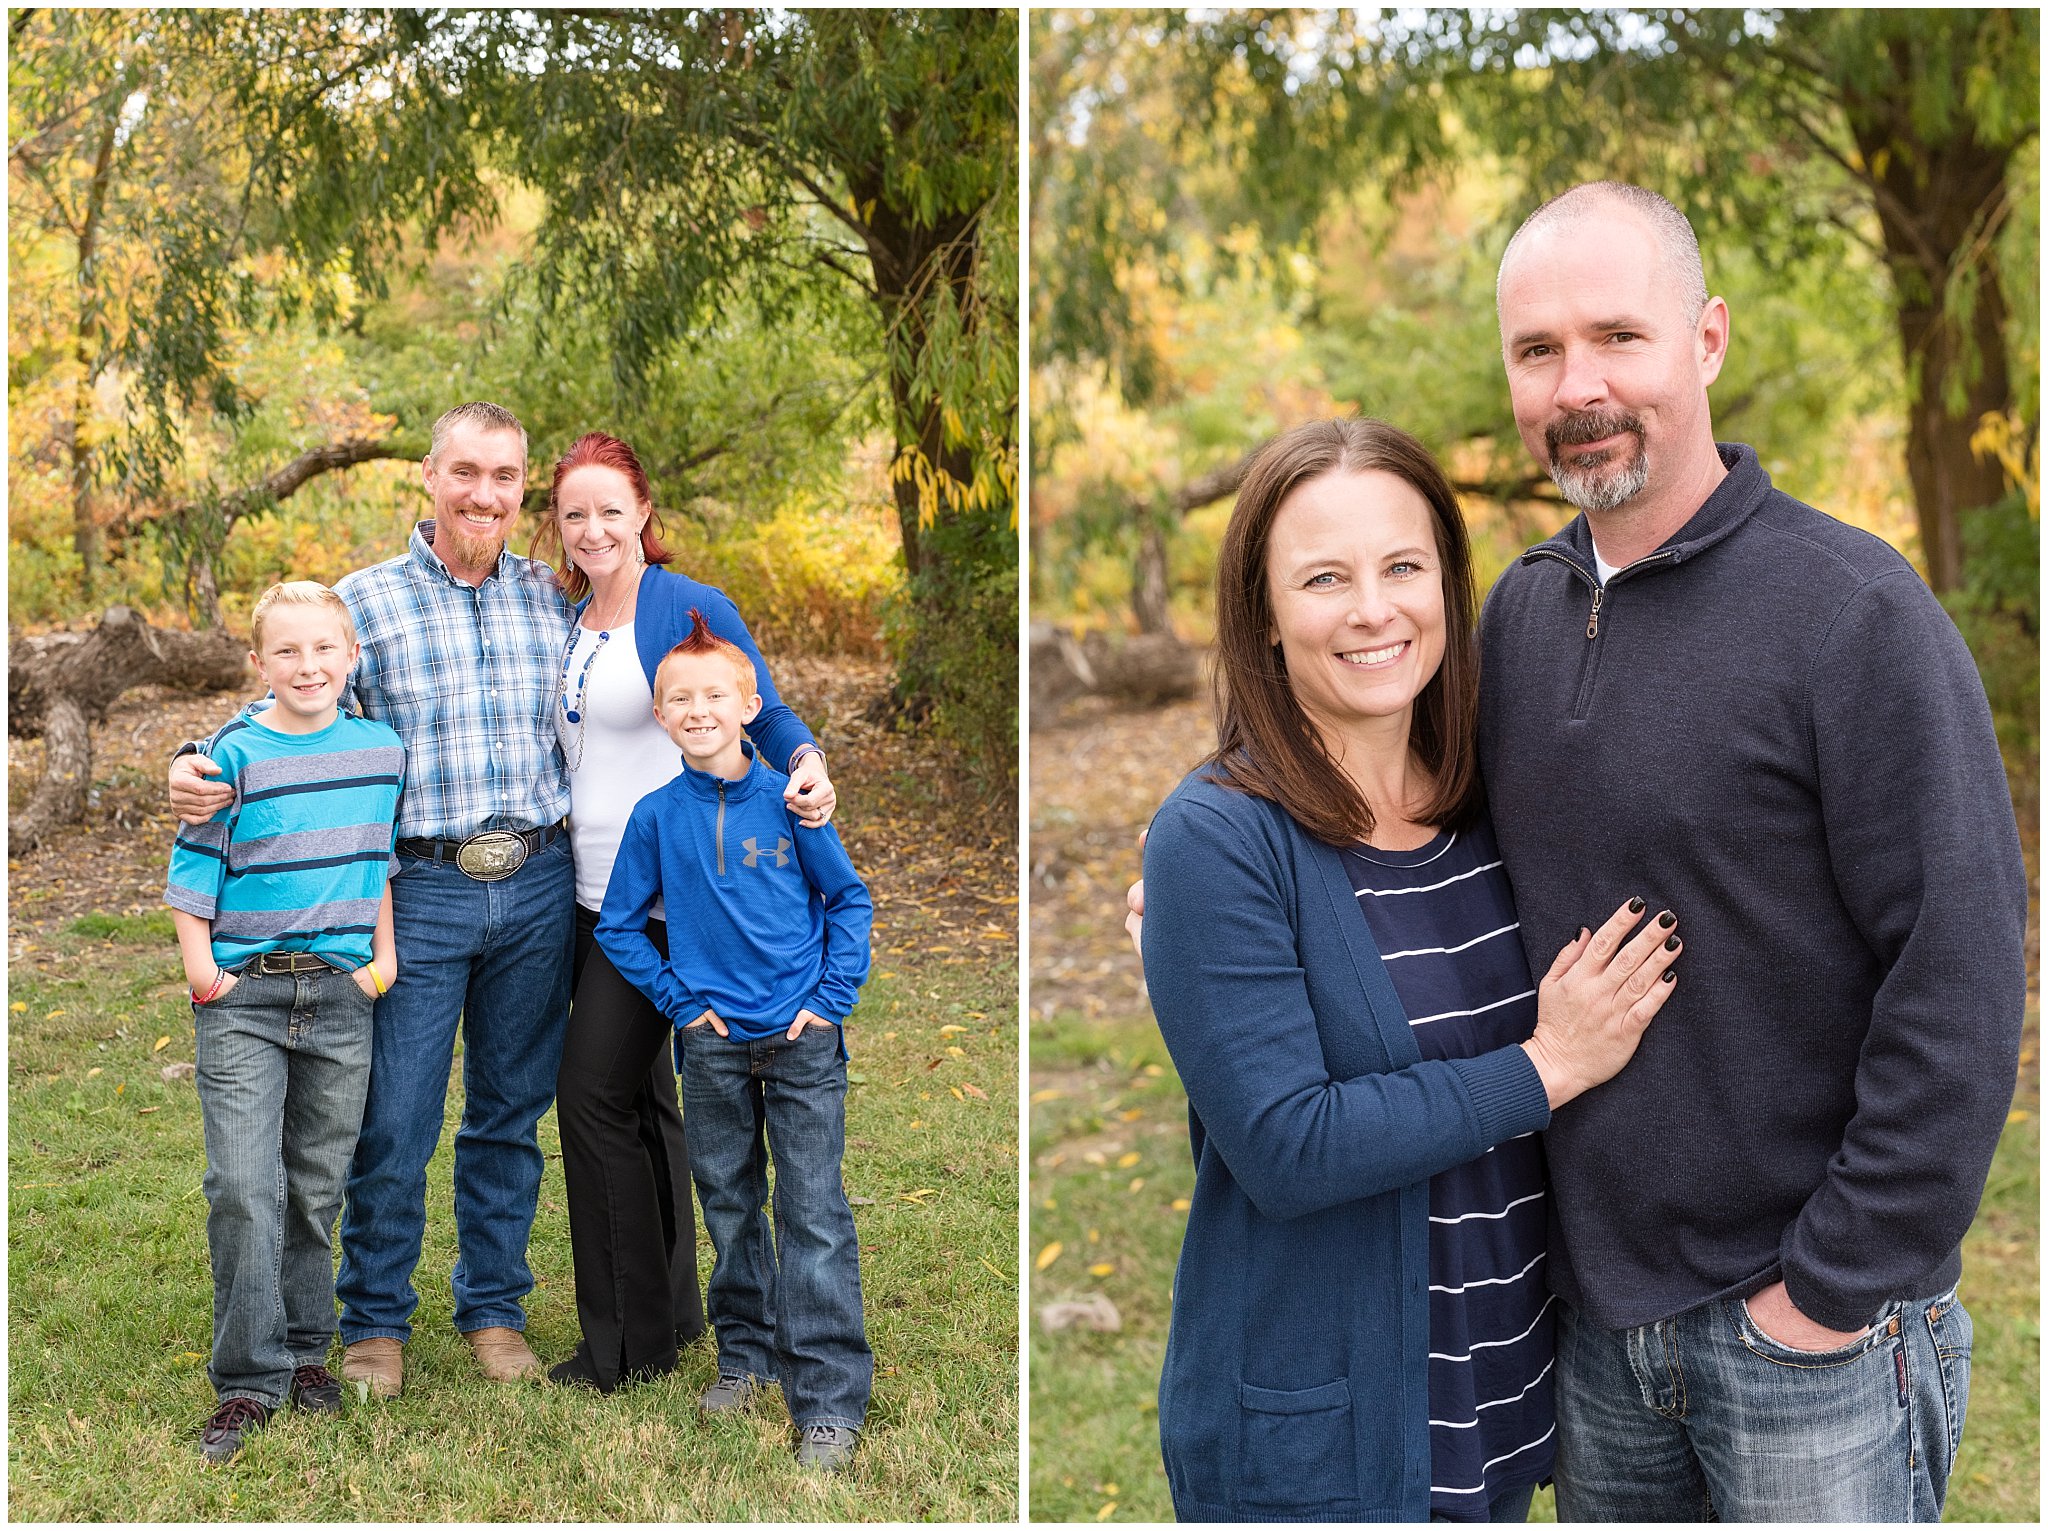 Couple and a family smiling at camera | Tremonton Family Pictures and Make a Wish Event | Jessie and Dallin Photography